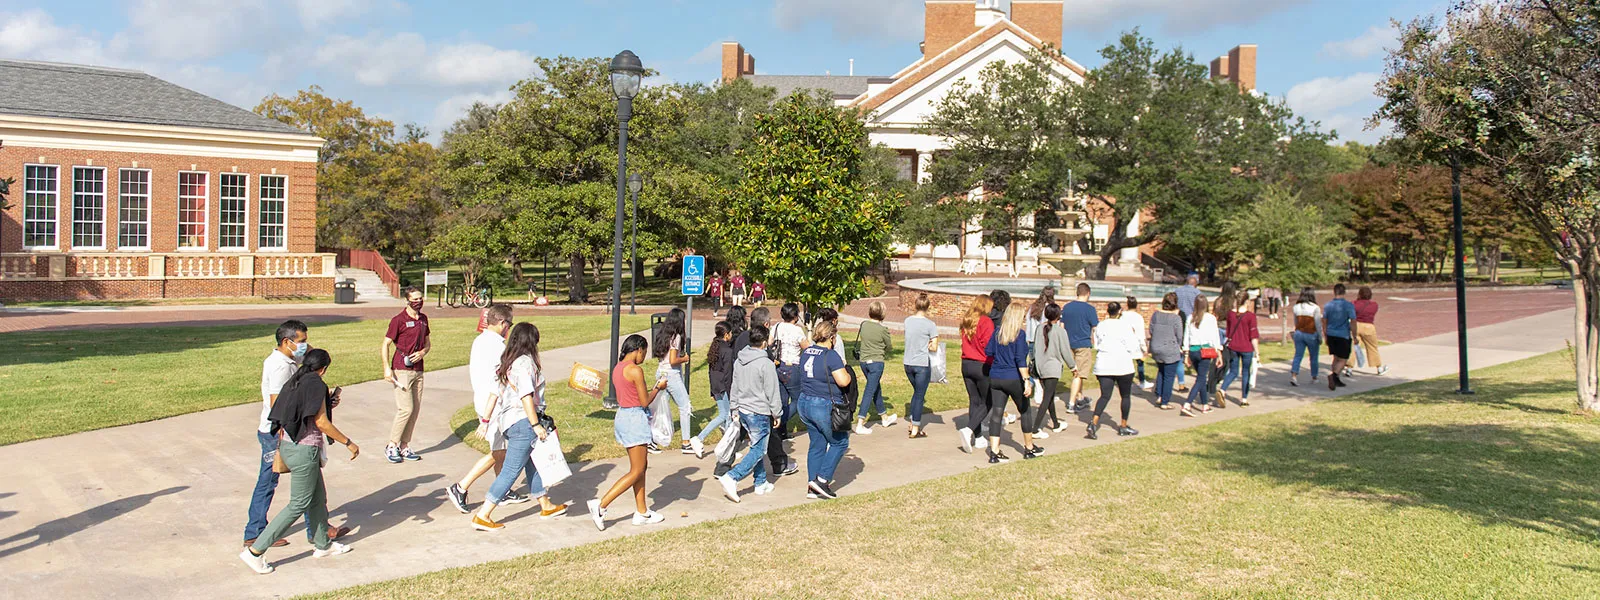 A TWU Pioneer Ambassador leads a group tour across the Denton campus